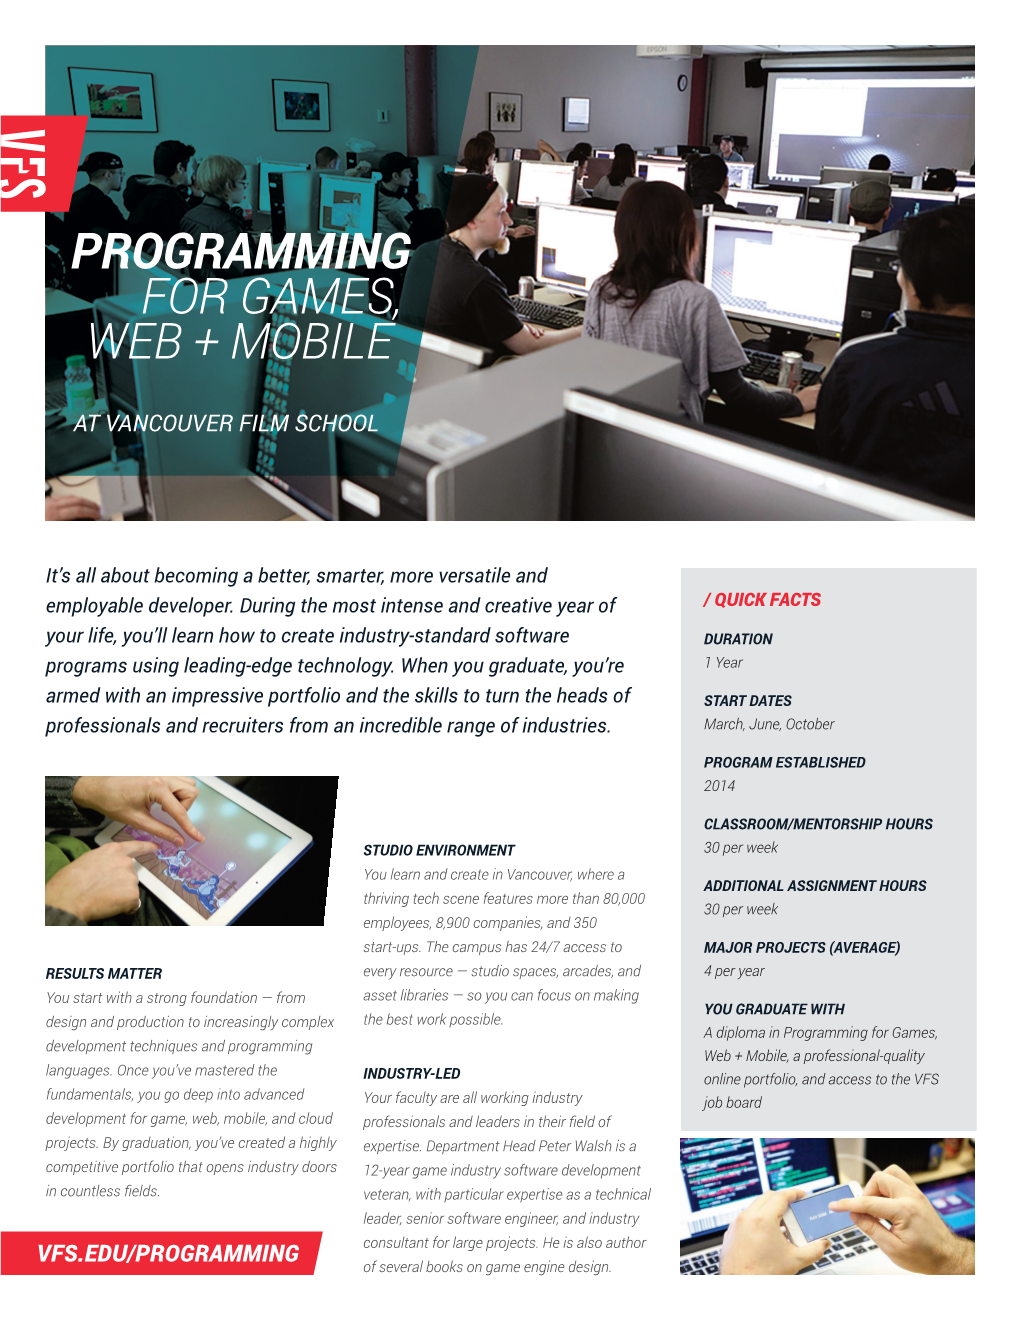 Programming for Games, Web + Mobile